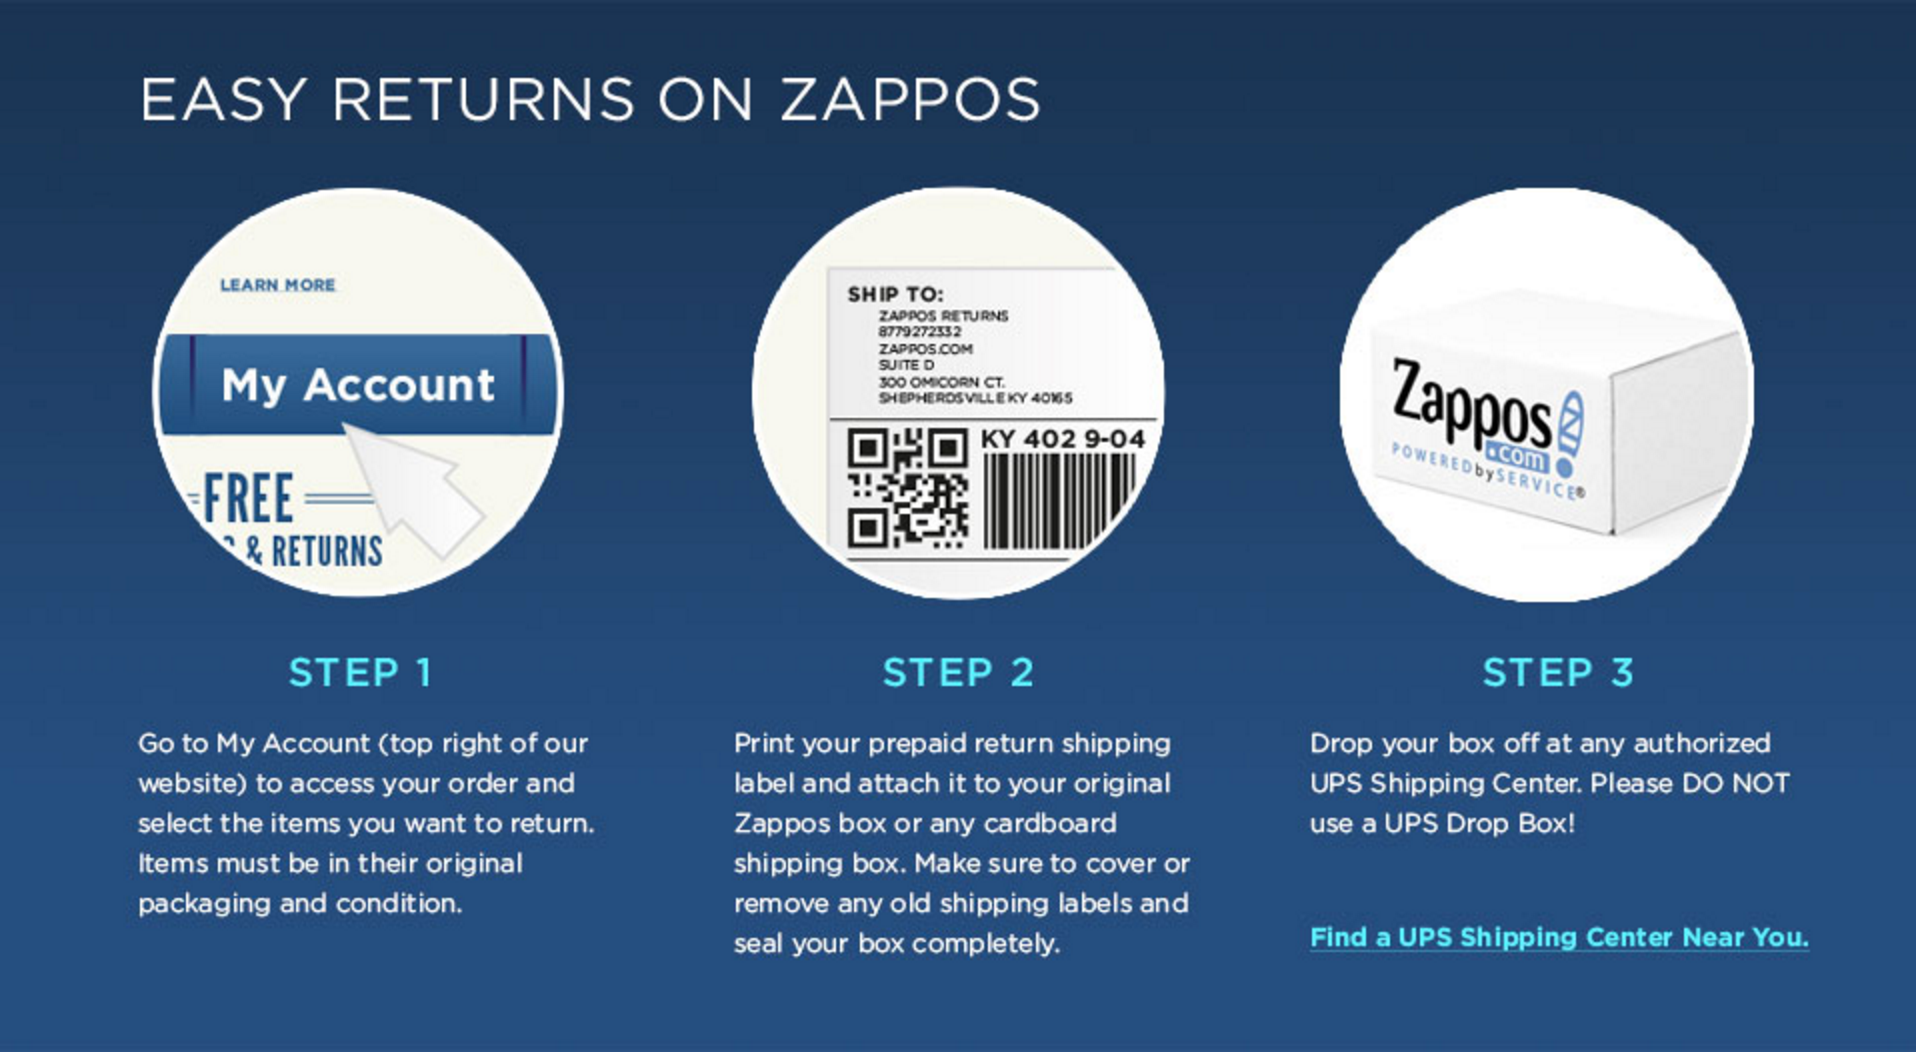 Zappos e-commerce returns policy.